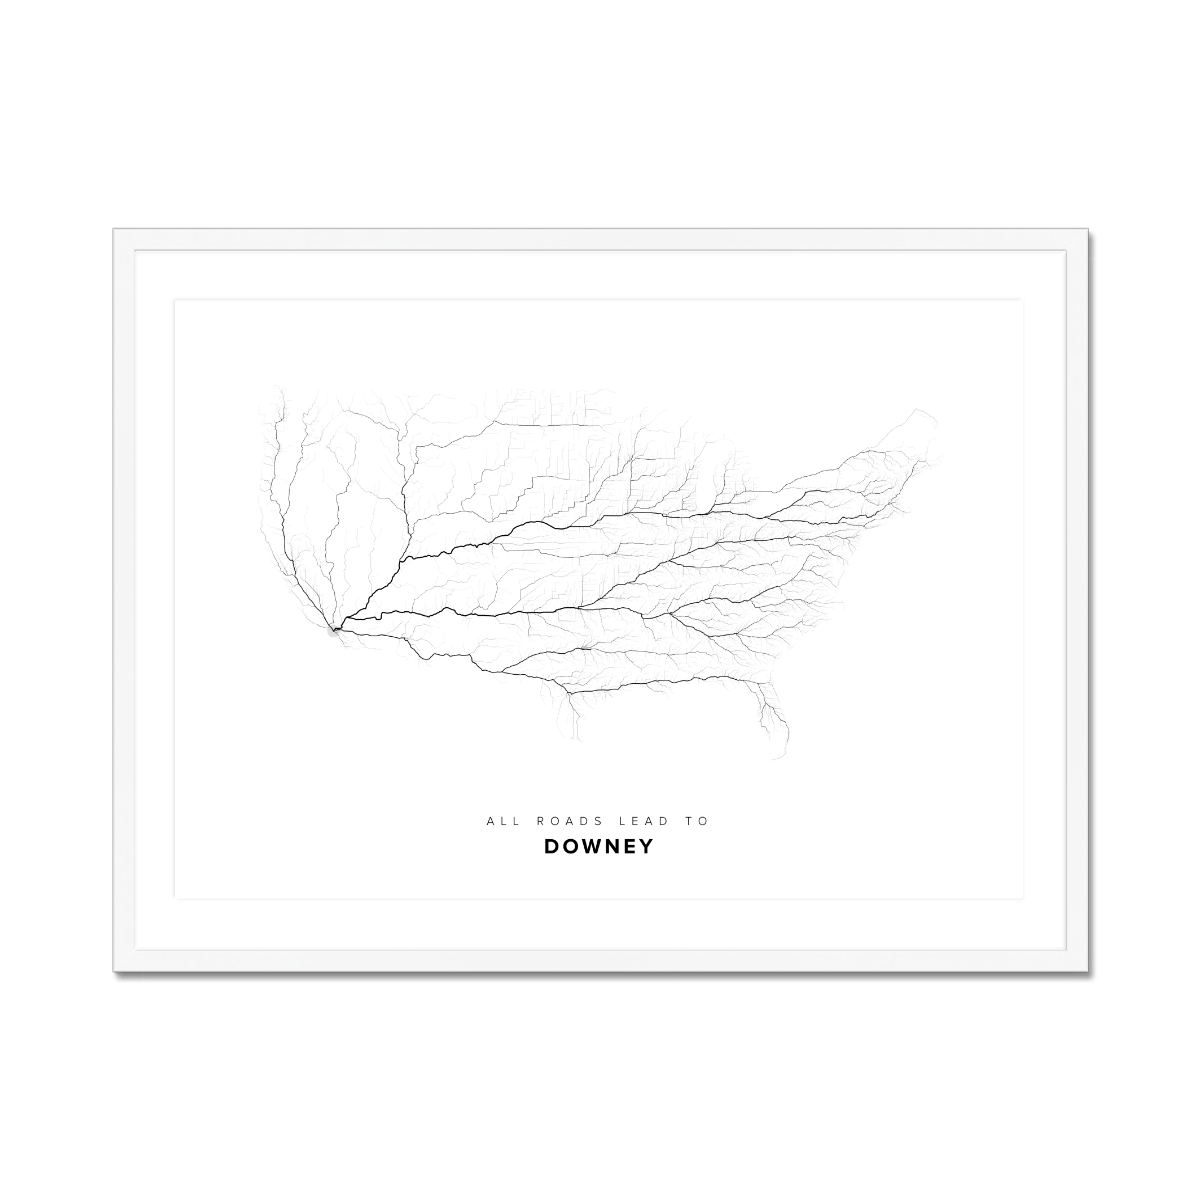 All roads lead to Downey (United States of America) Fine Art Map Print